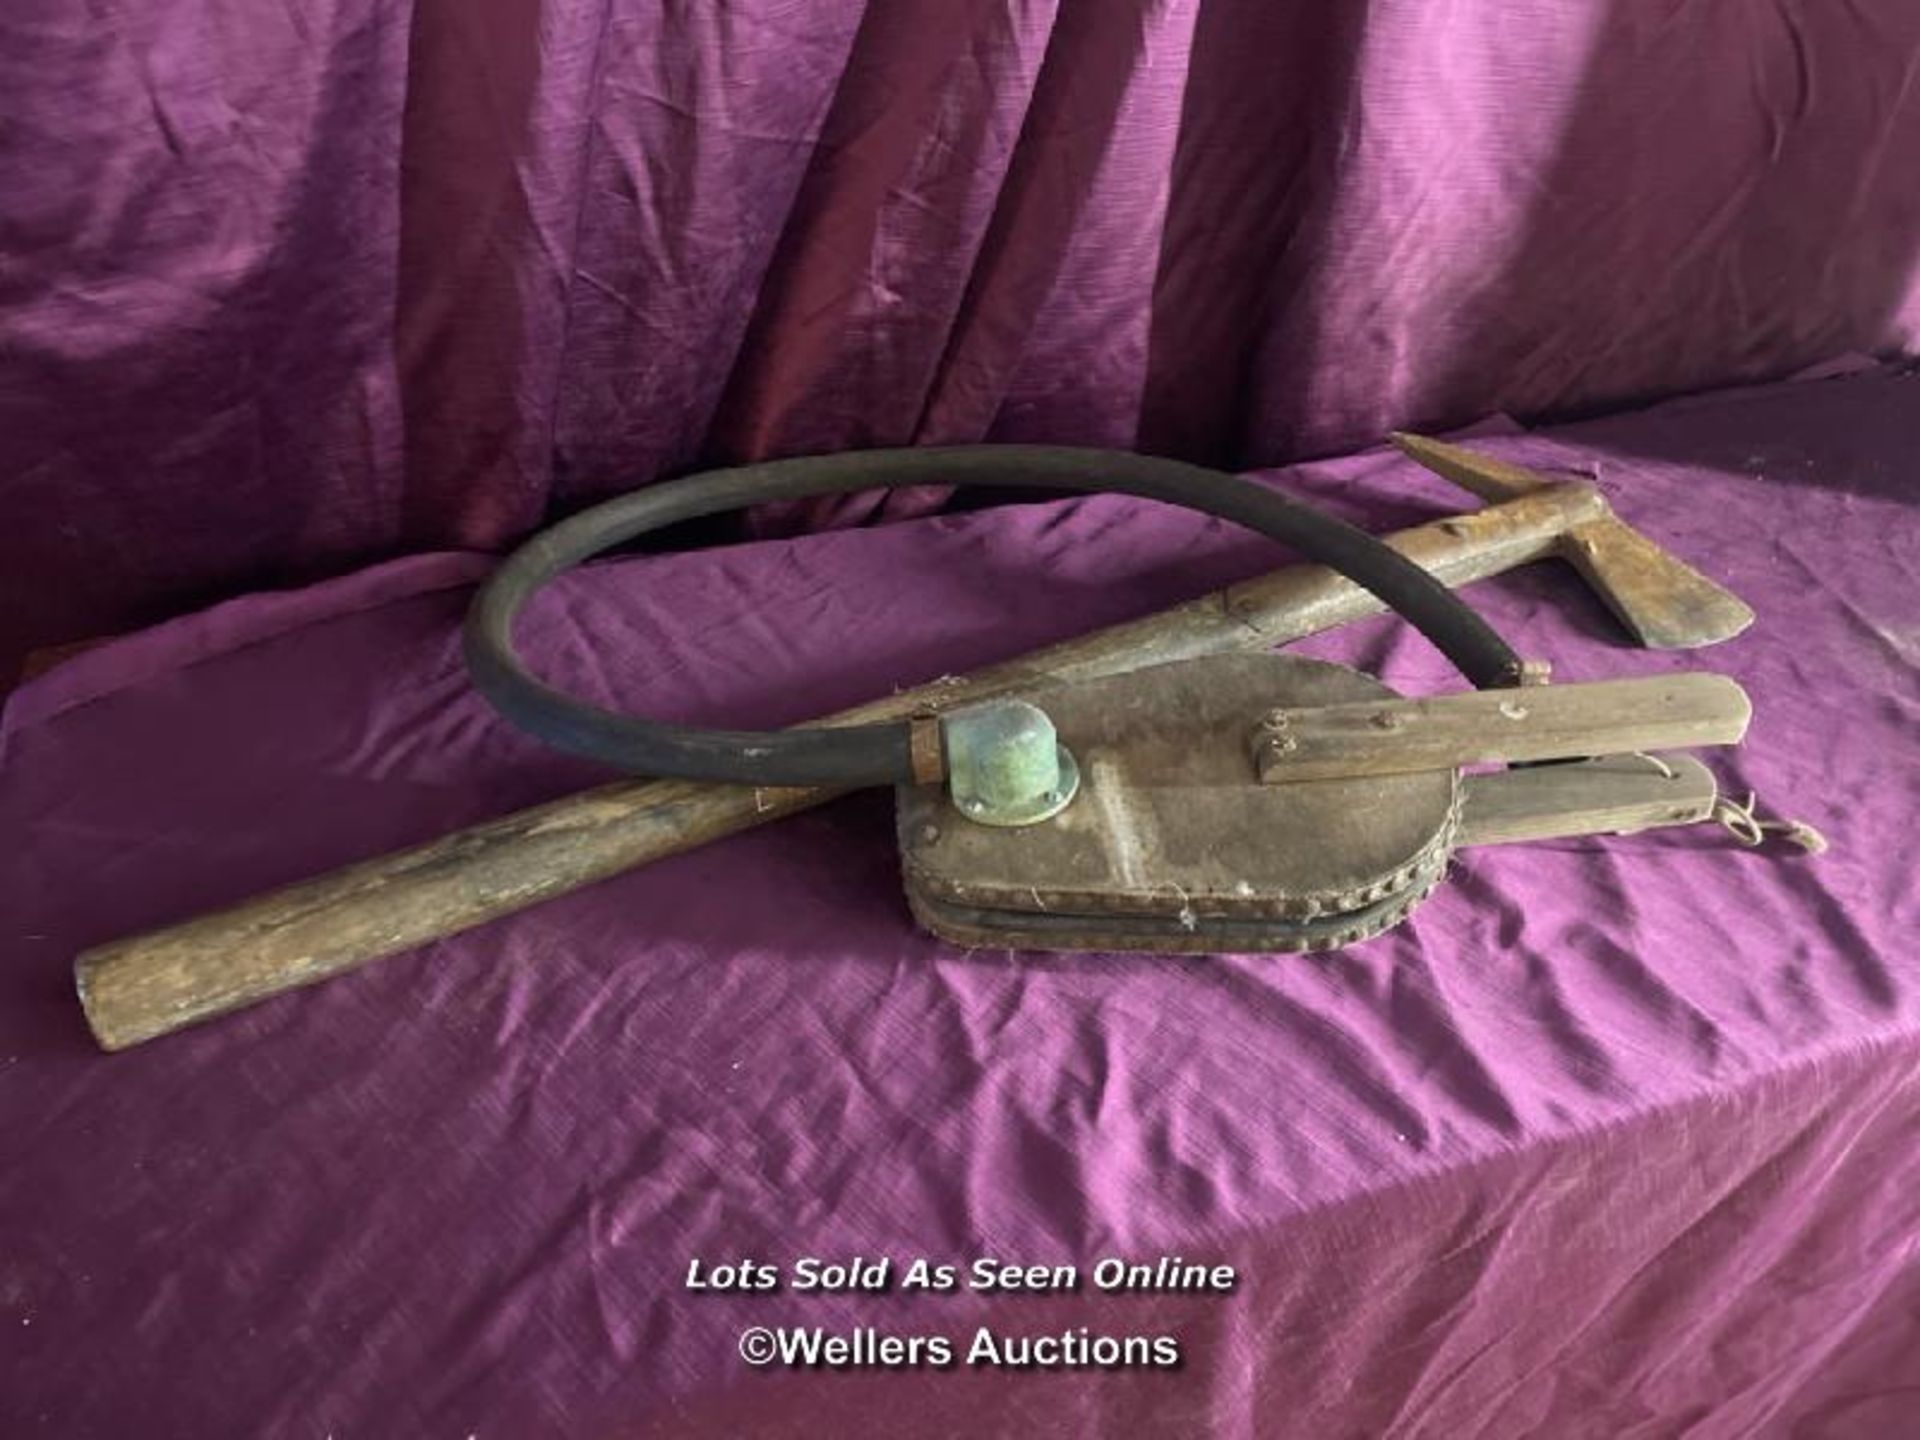 CIRCA 1900'S FIREMANS AXE, 93 X 28CM, AND A PAIR OF OLD BELLOWS - Image 2 of 3